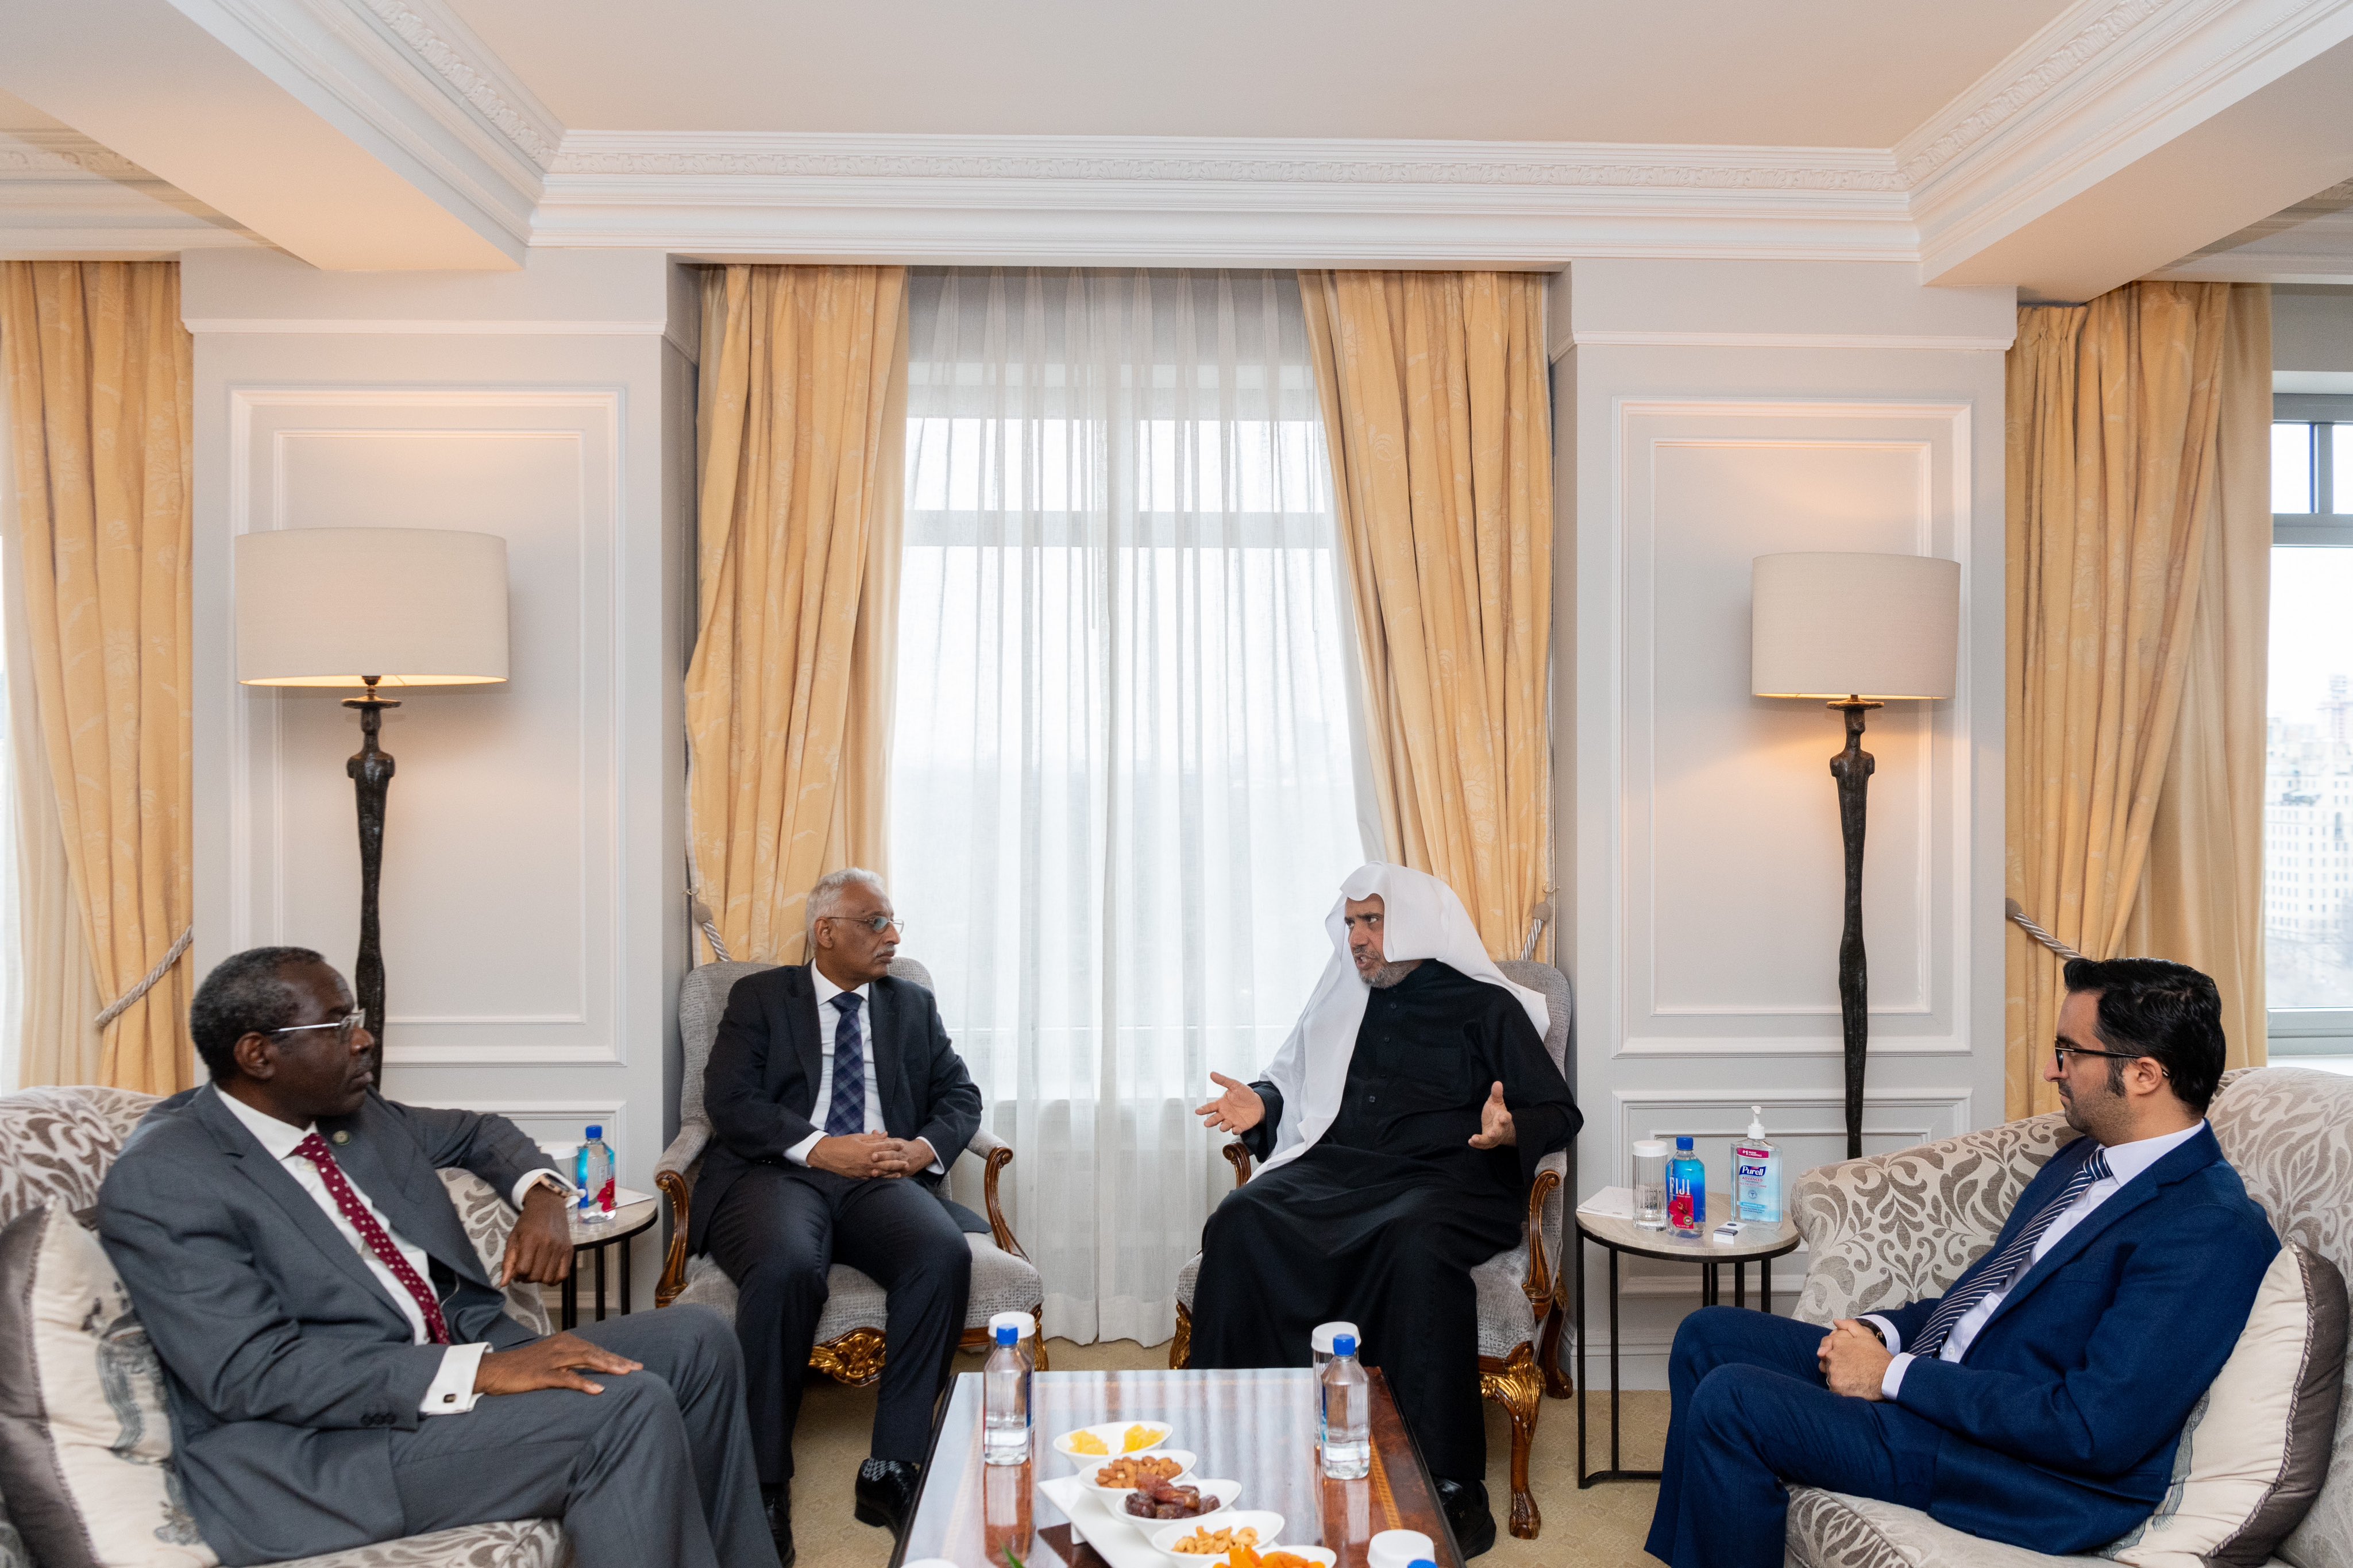 His Excellency Sheikh Dr. Mohammad Al-Issa, met with His Excellency Ambassador Hameed Opeloyeru, Permanent Observer of the Organization of Islamic Cooperation to the United Nations